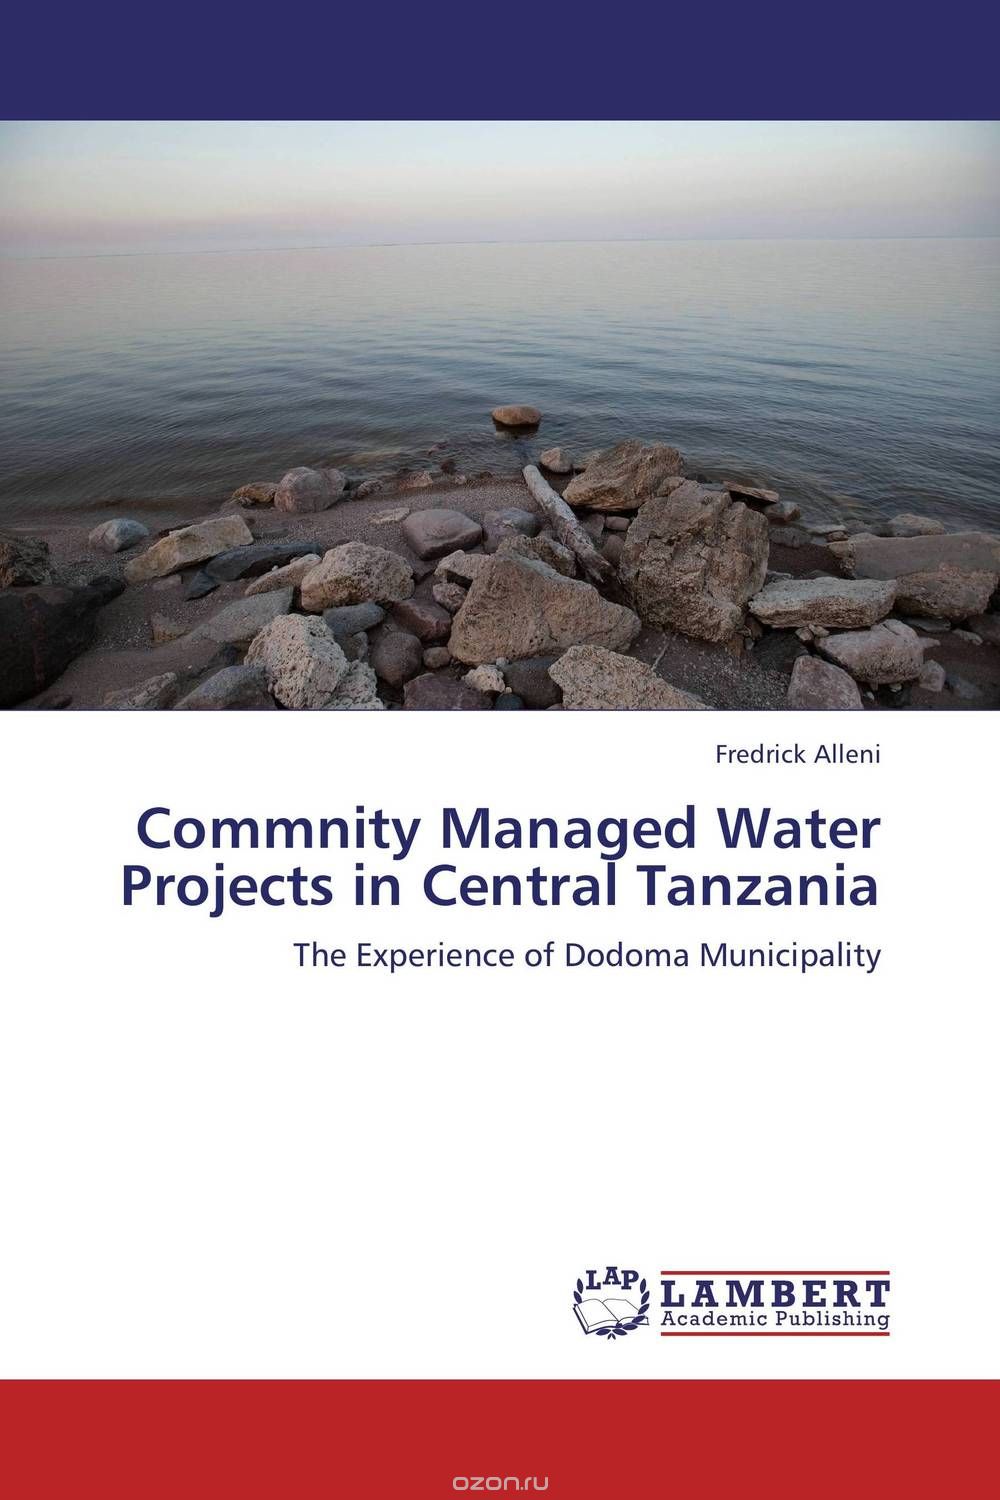 Скачать книгу "Commnity Managed Water Projects in Central Tanzania"